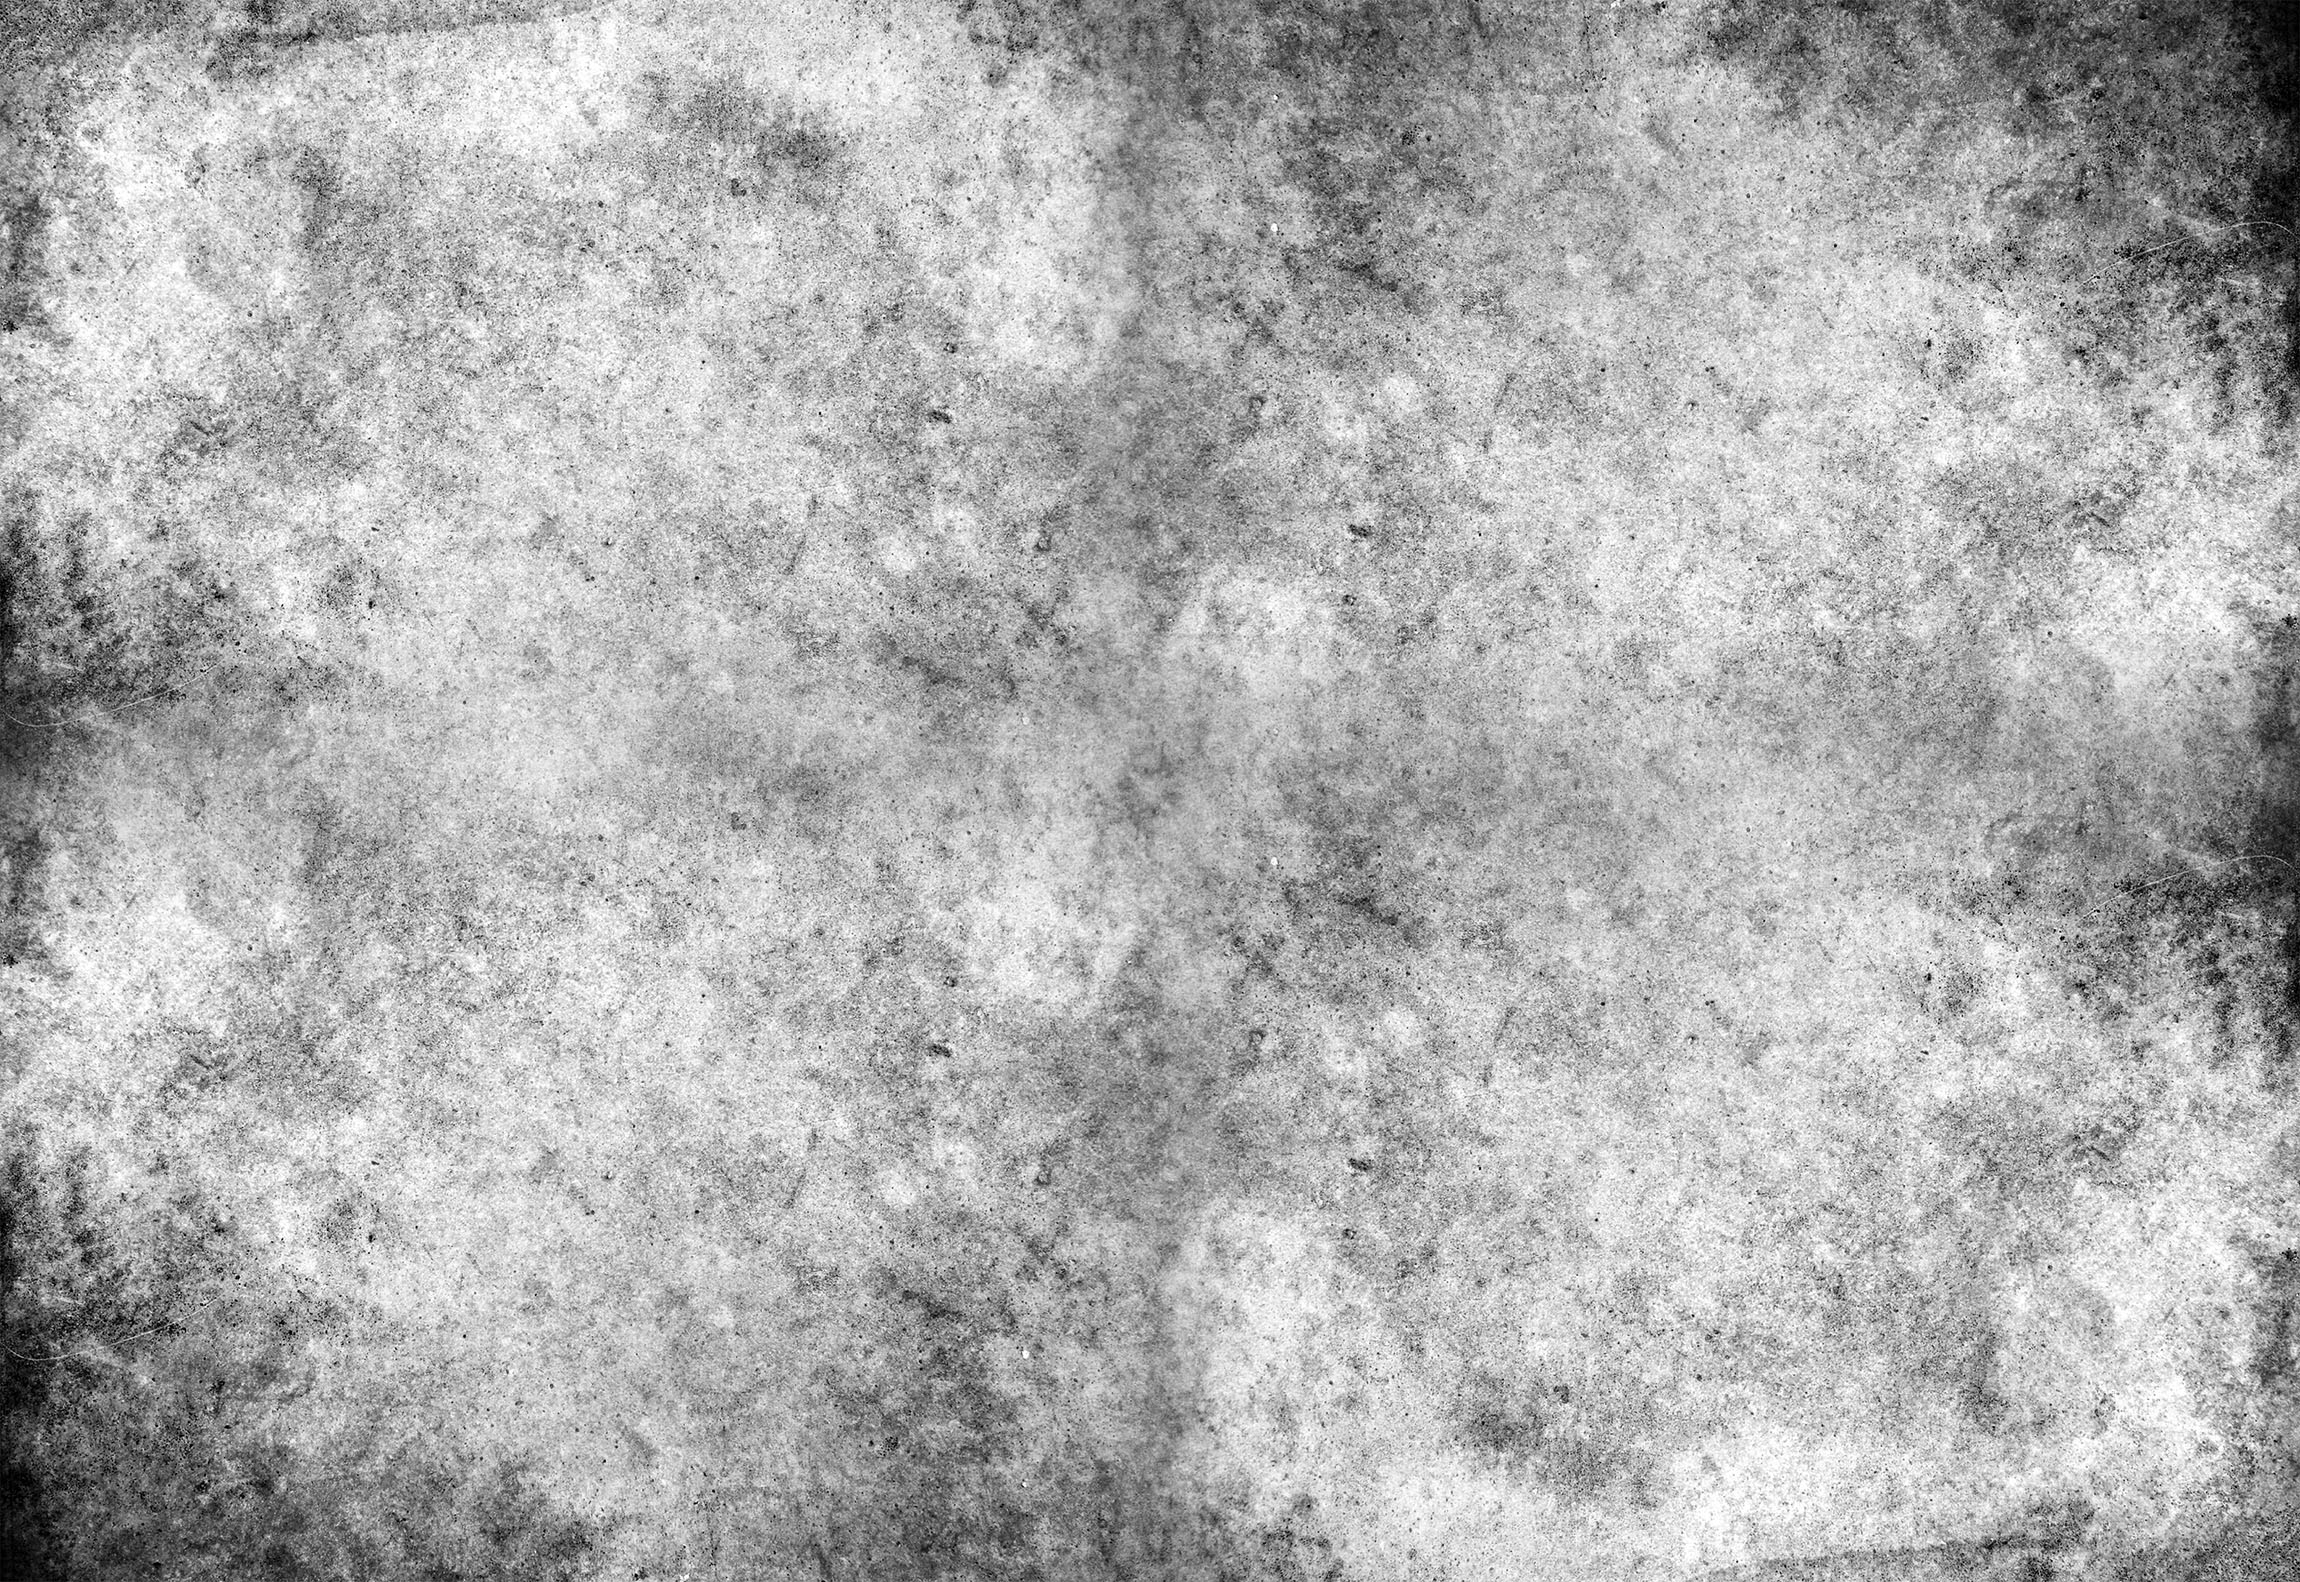 Black And White Grunge Texture Hd , HD Wallpaper & Backgrounds